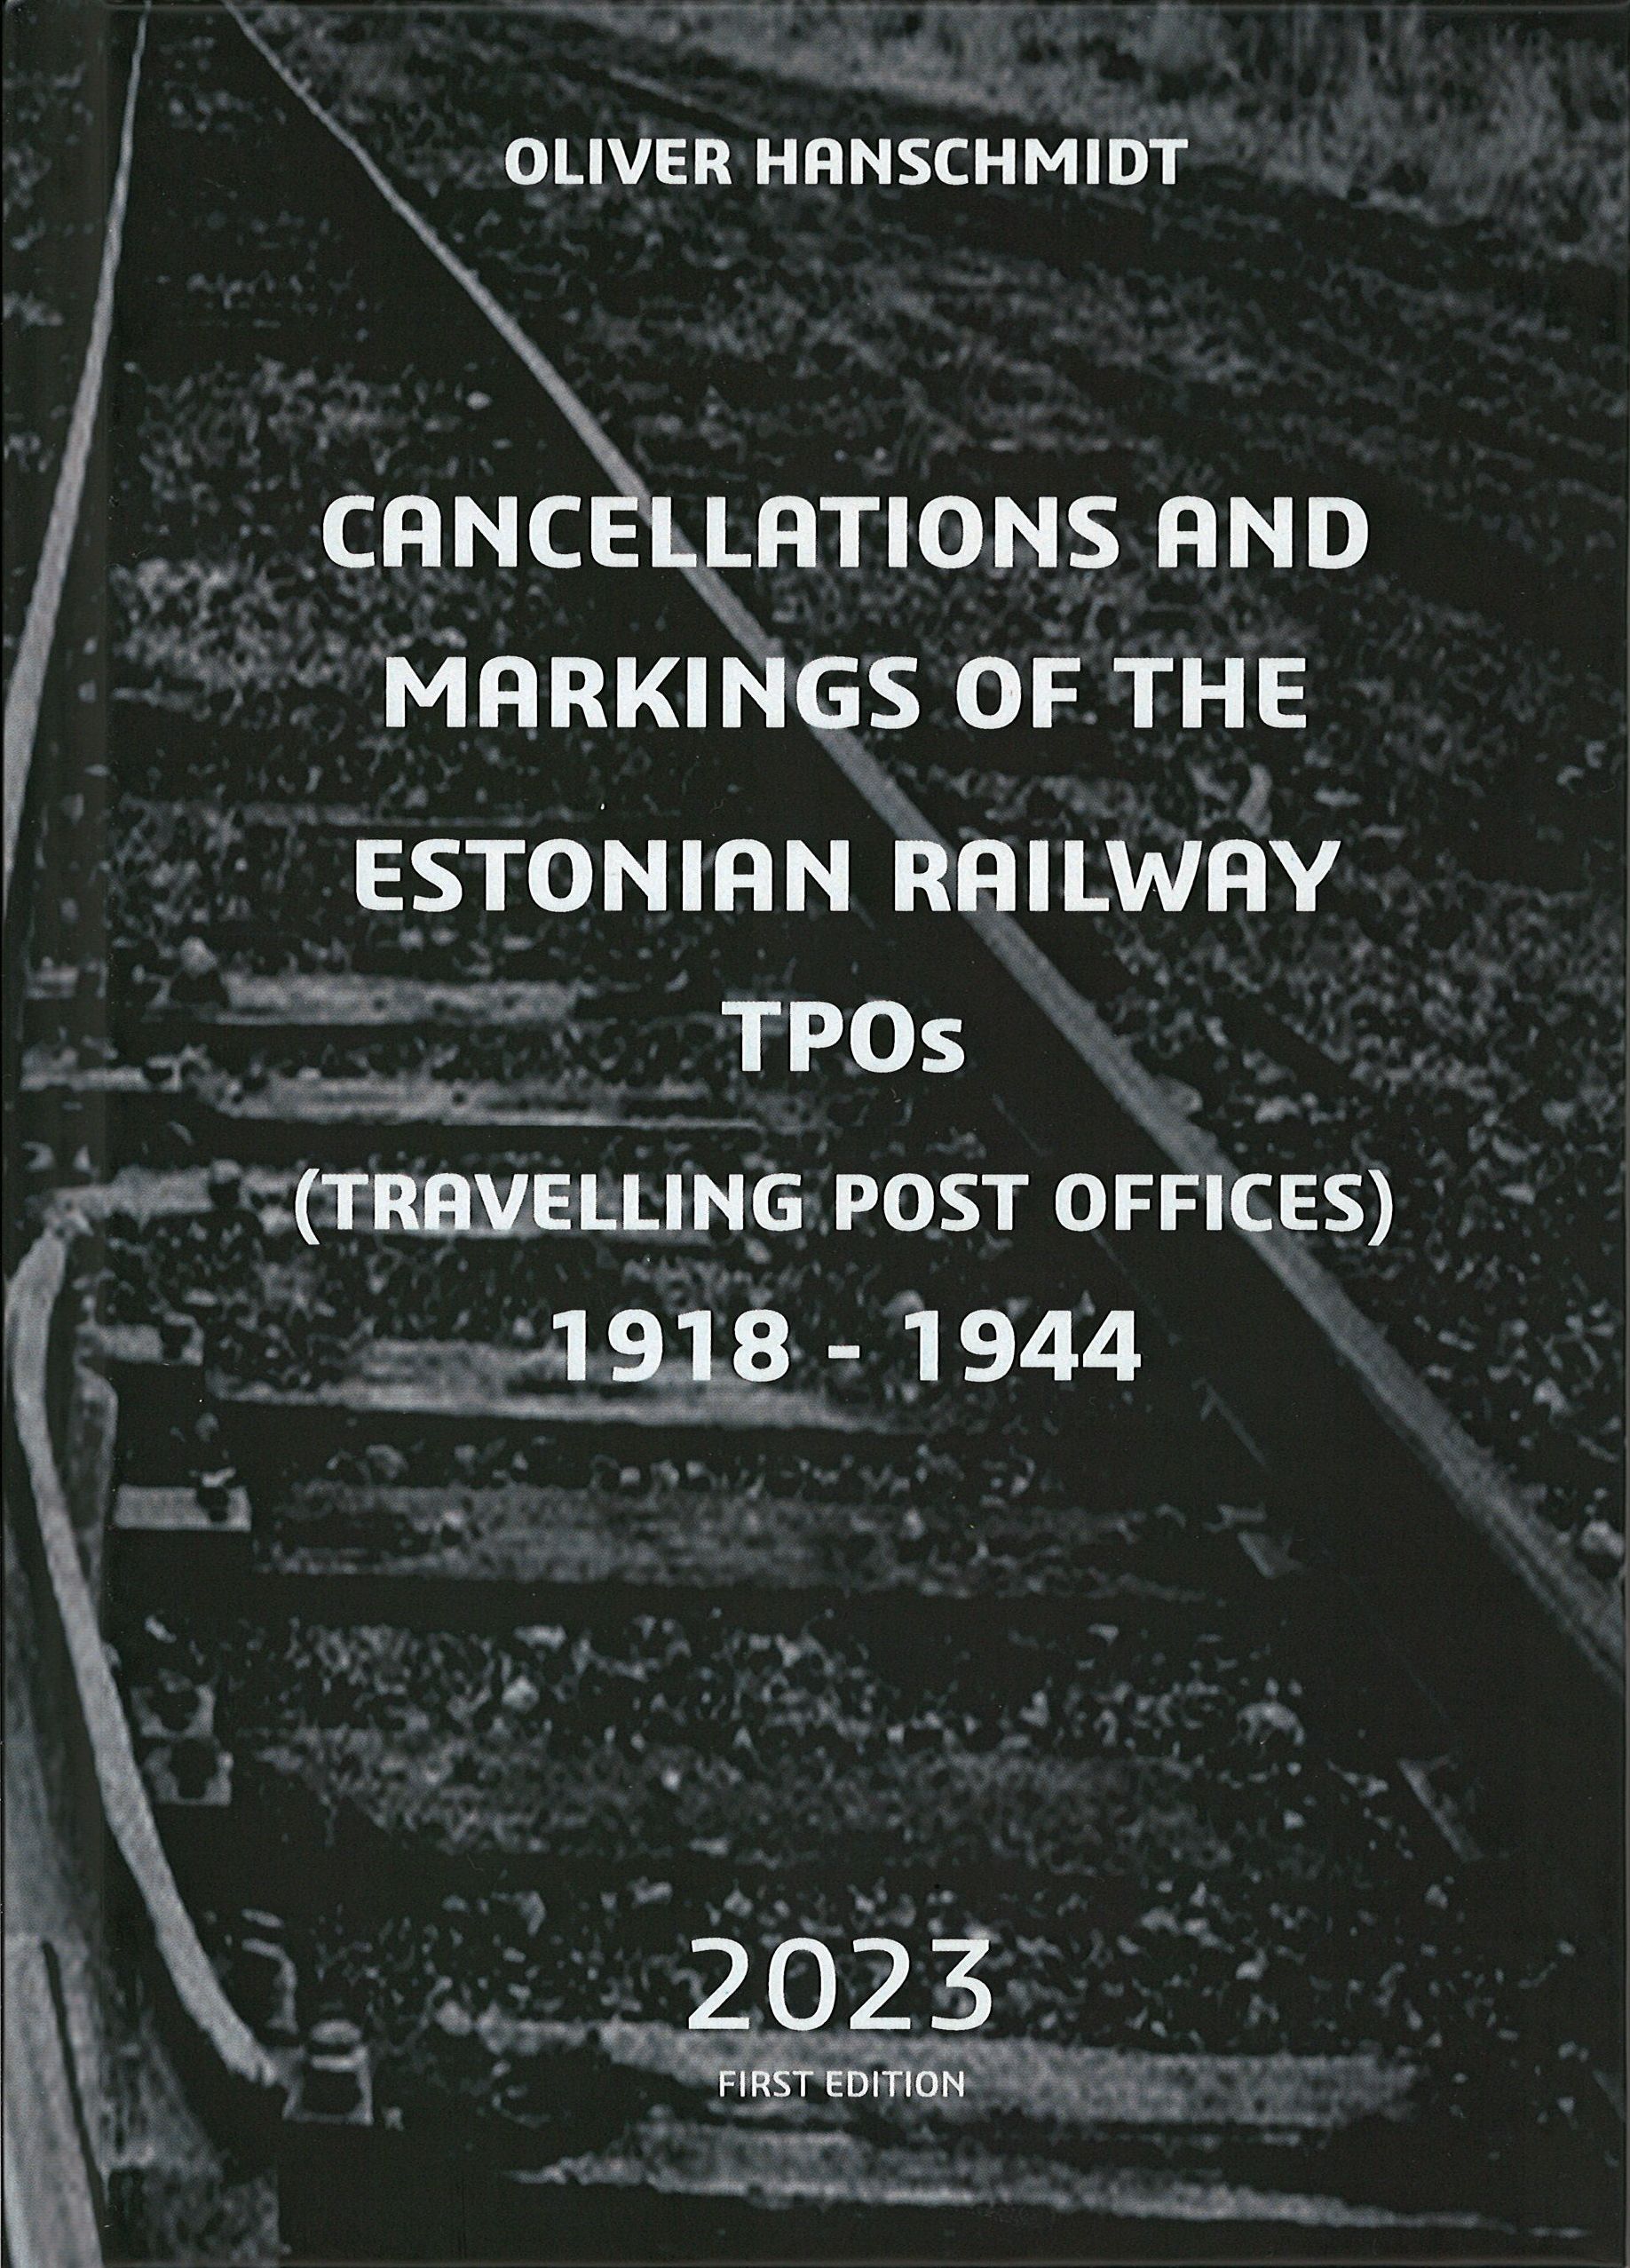 Cancellations and Marking of the Estonian Railway TPOs 1918-1944